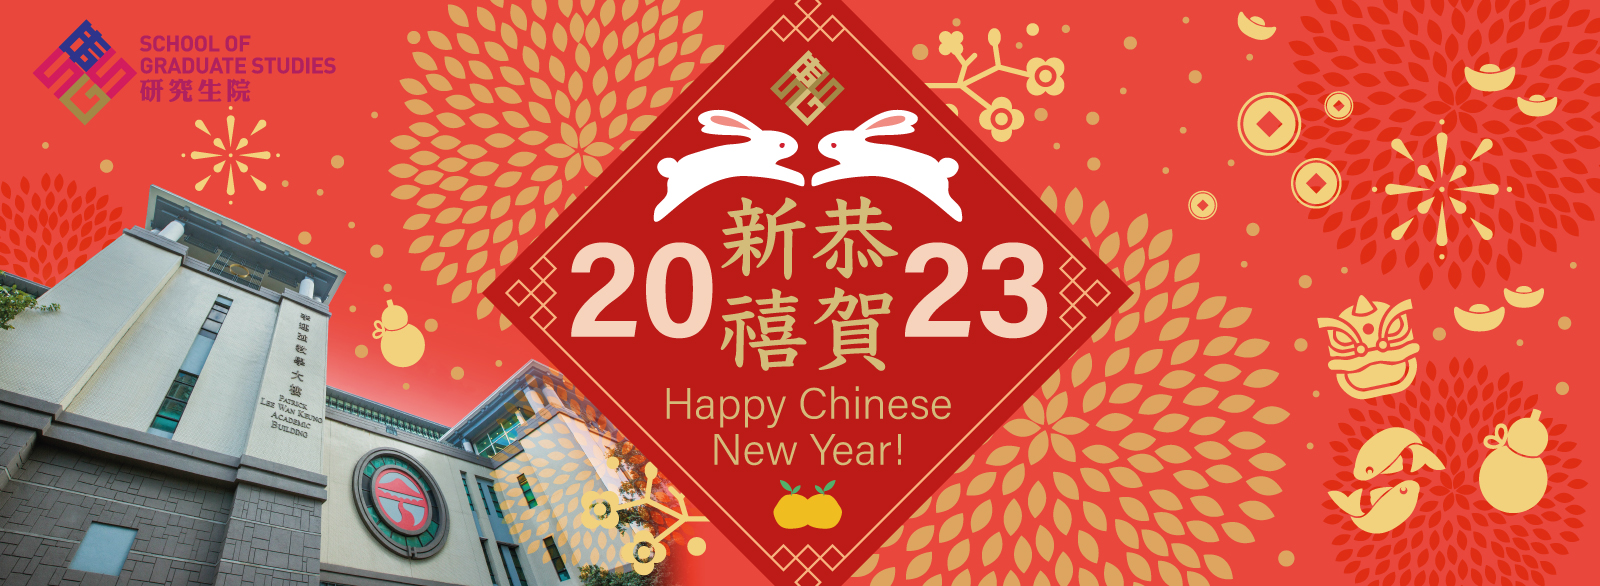 Wish you a Productive and Healthy Year of 2023!